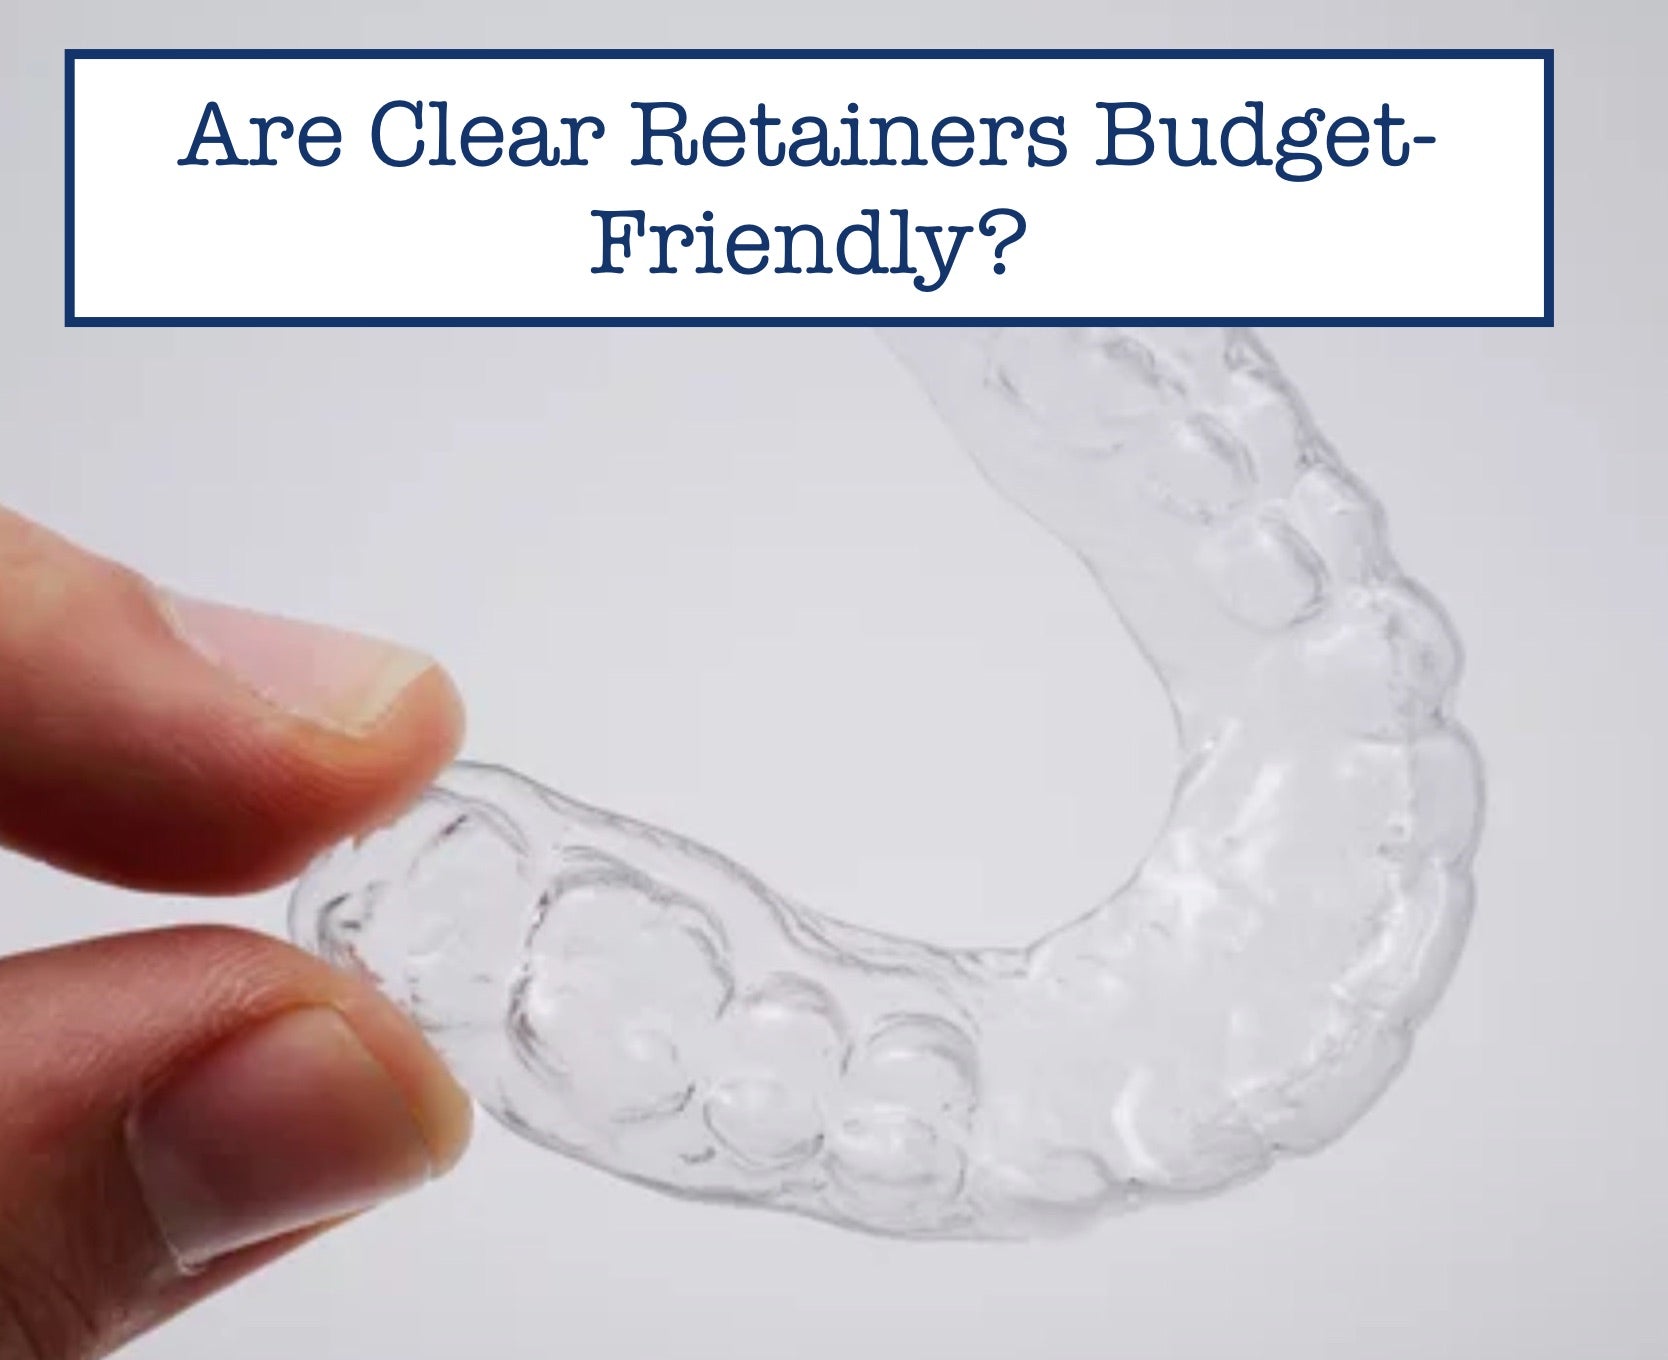 Are Clear Retainers Budget-Friendly?